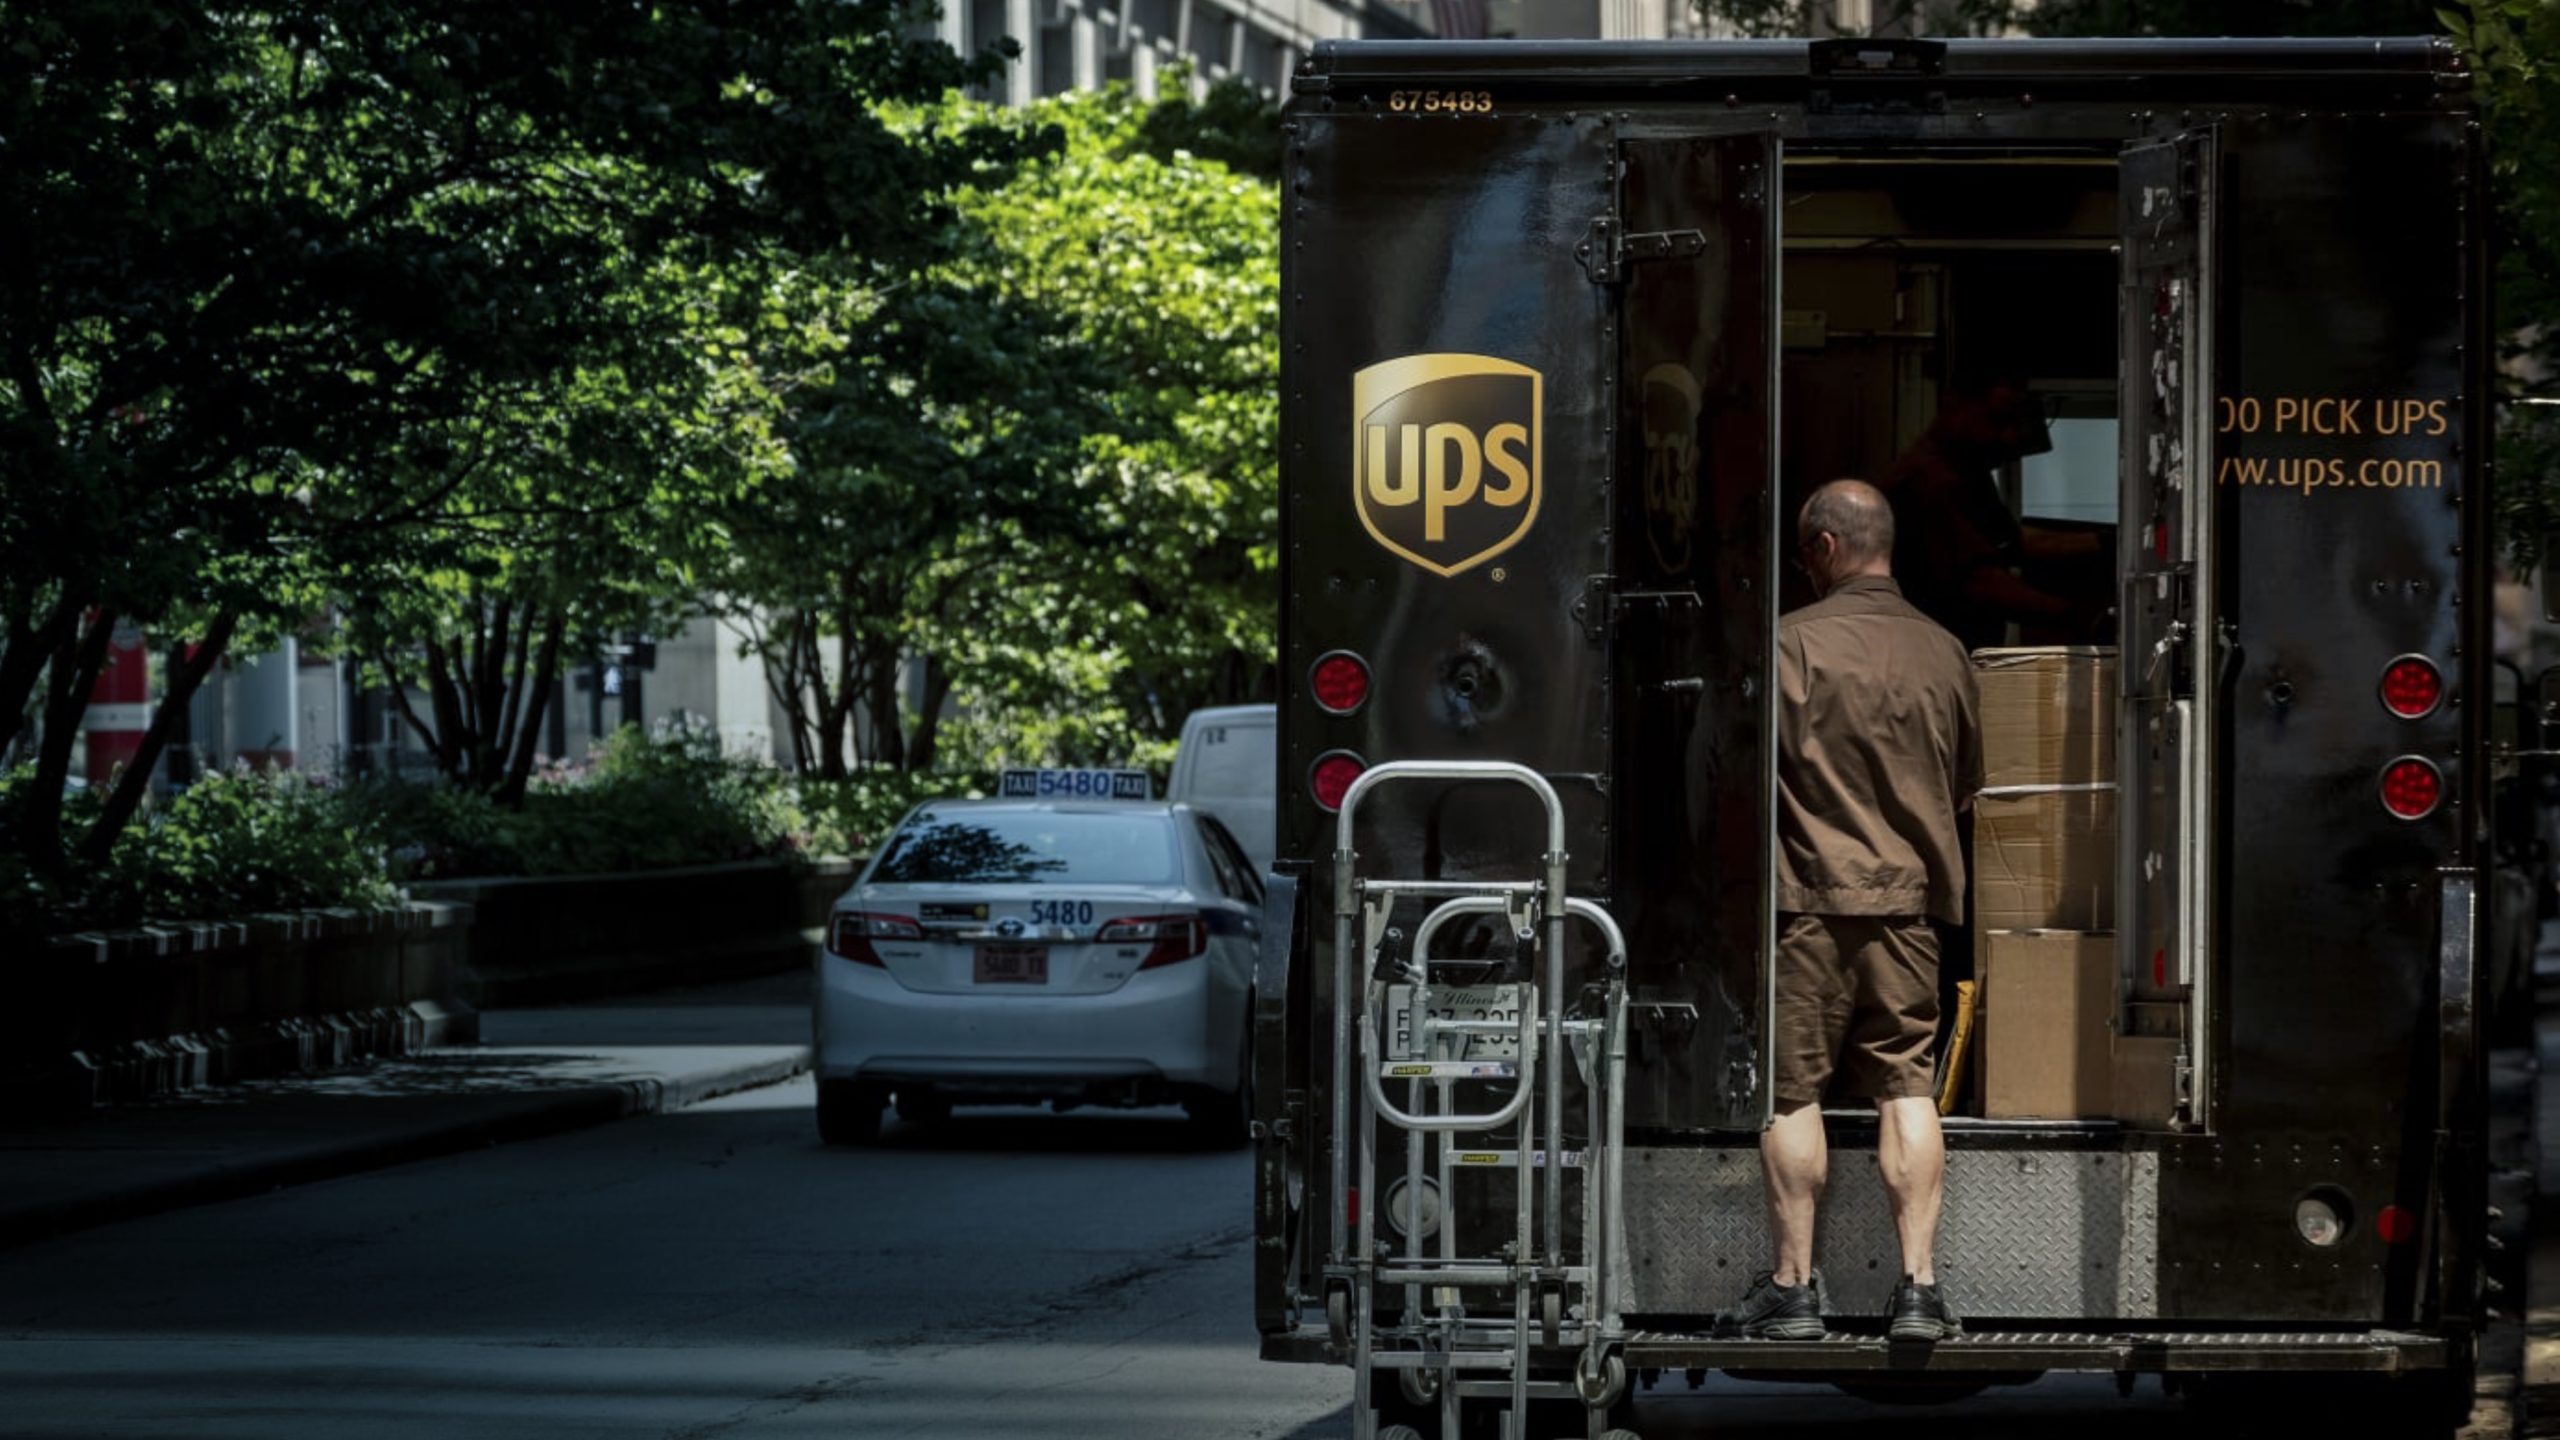 UPS ‘Punishes Drivers’ For Holding Prayer Meetings - Harbingers Daily